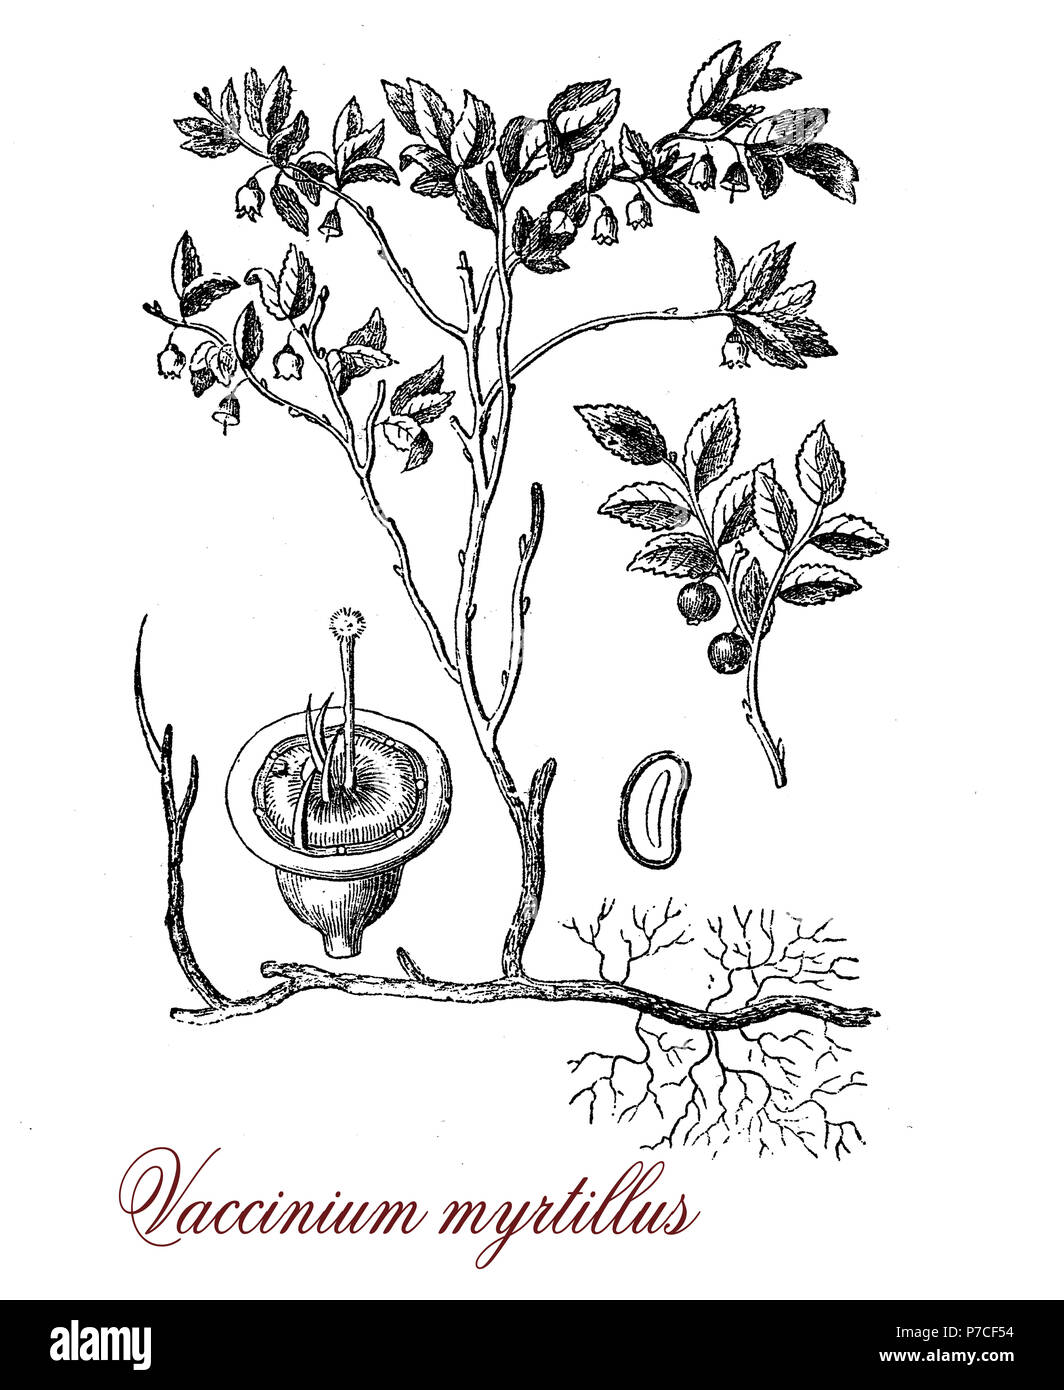 Vintage botanical engraving of European blueberry,shrub with edible fruits of blue color used also in traditional medicine for circulatory problems, diabetes and as vision aids. Blueberry is used as food in pies,cakes,muffins,cookies,syrups and juices. Stock Photo